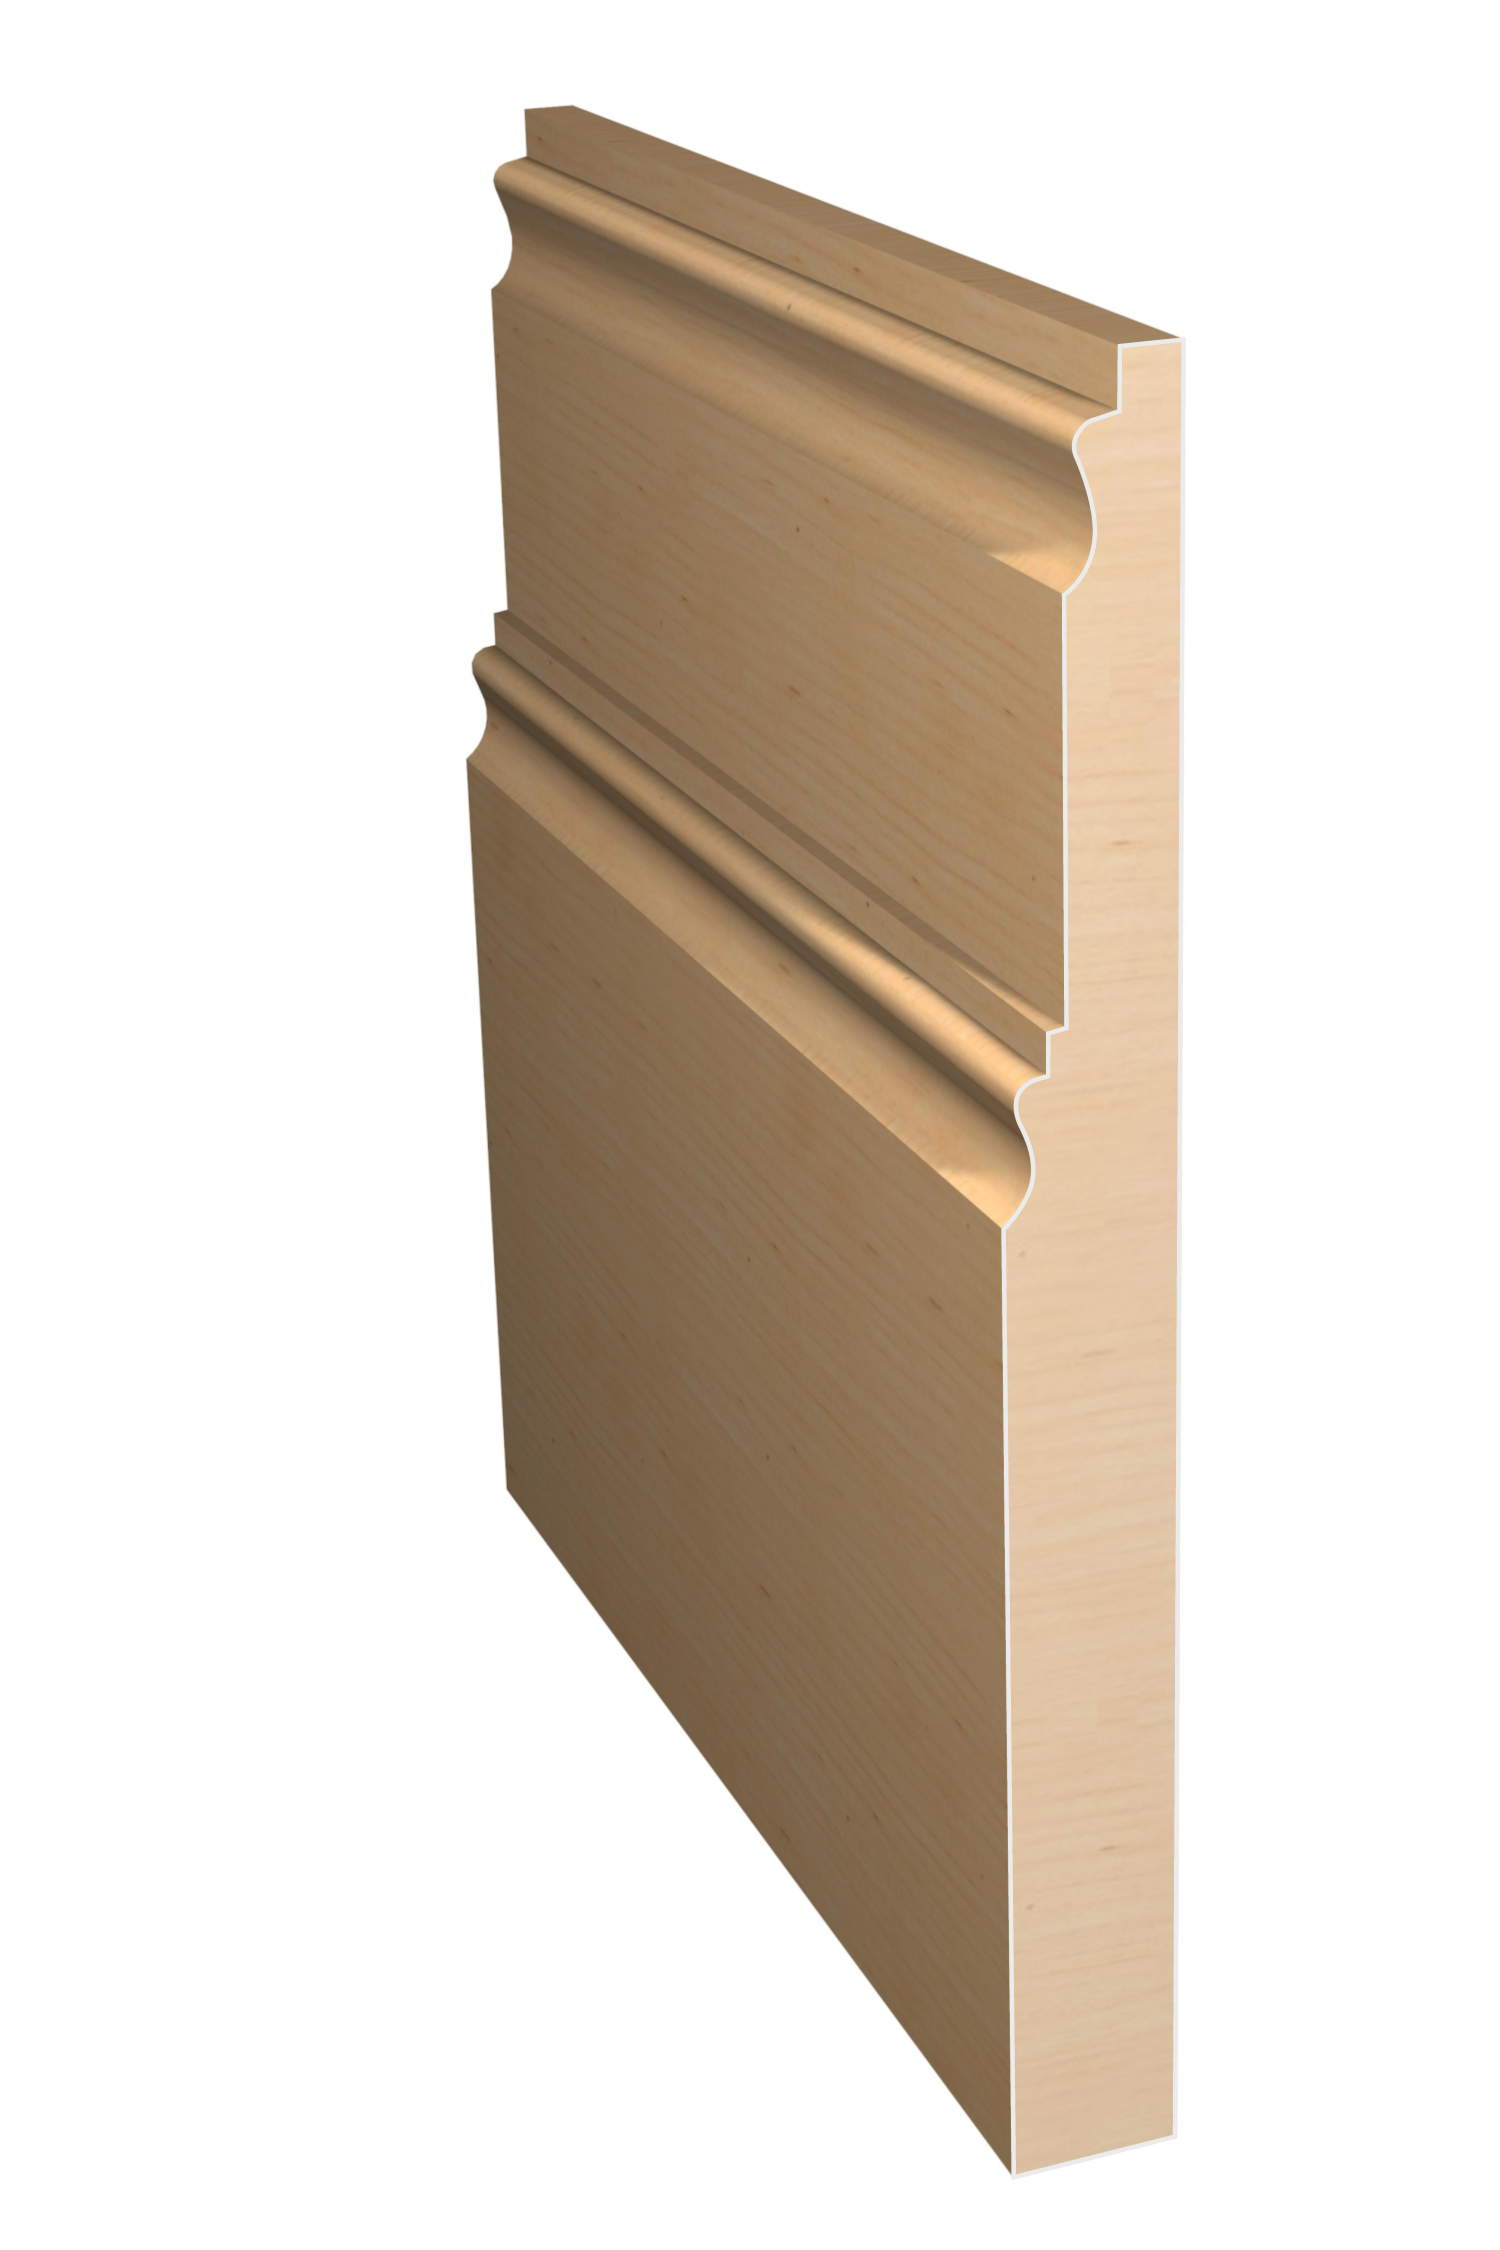 Three dimensional rendering of custom base wood molding BAPL78 made by Public Lumber Company in Detroit.